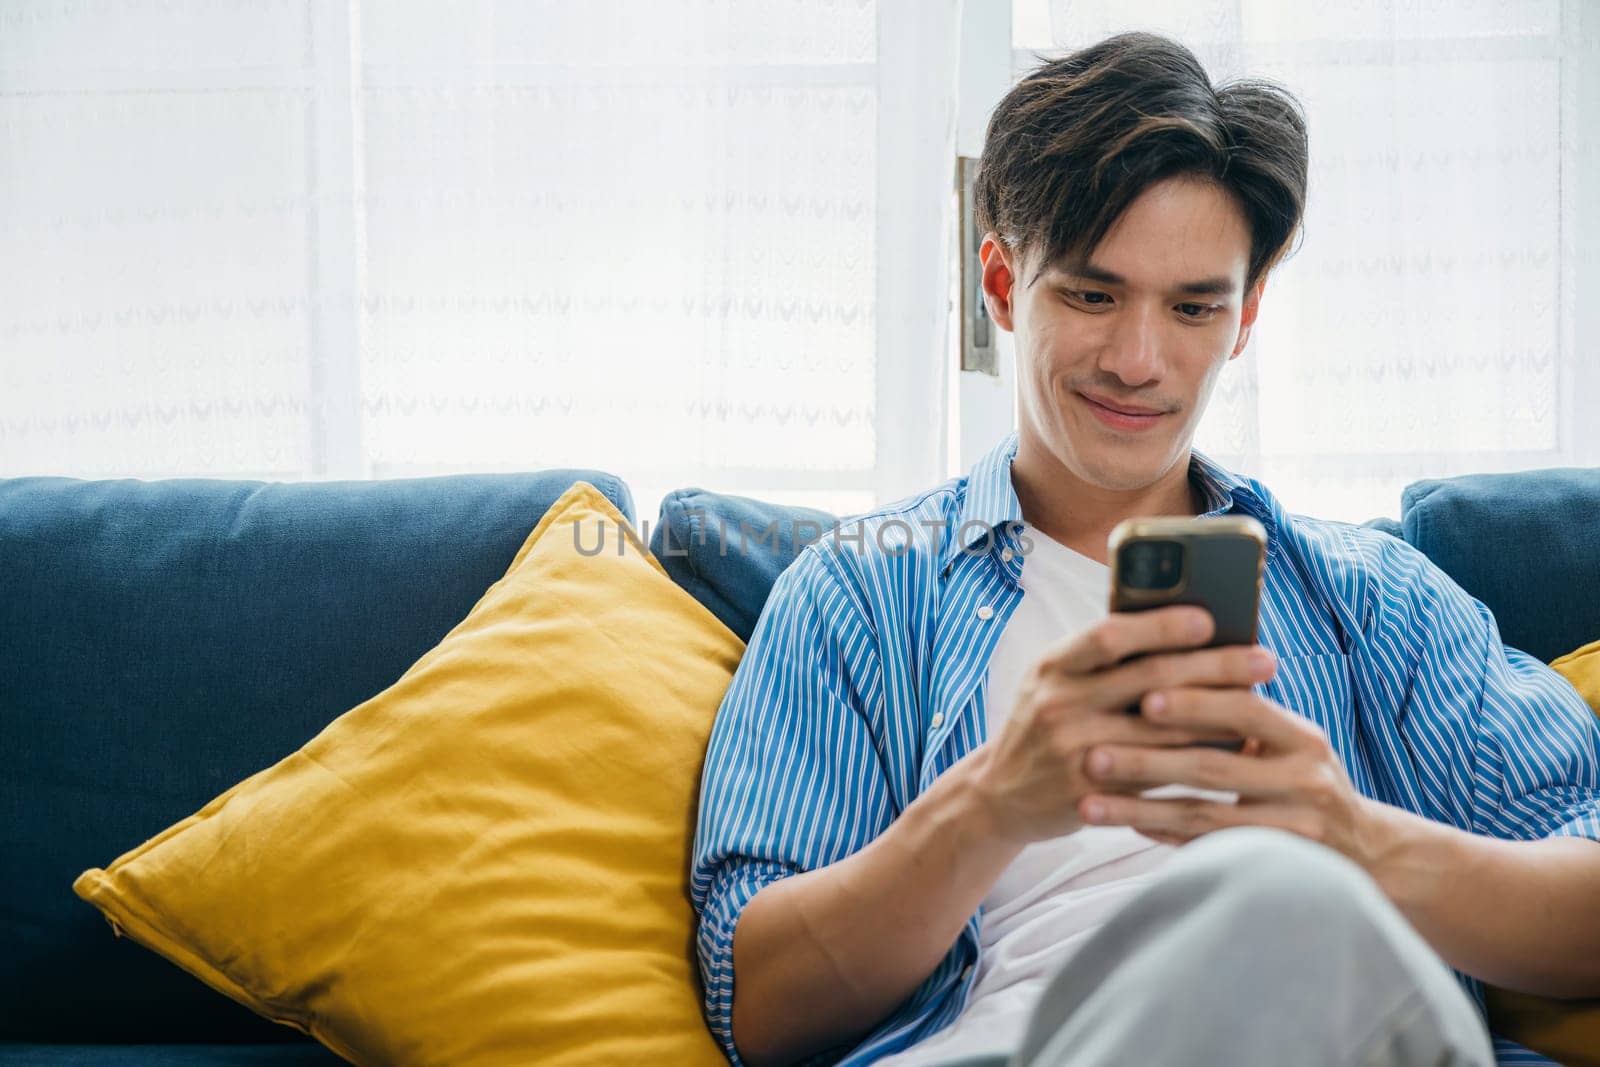 Engaged in a phone conversation a happy young man sits on a sofa enjoying relaxation. Embracing technology and communication he exudes happiness and success. scrolling on social media. by Sorapop